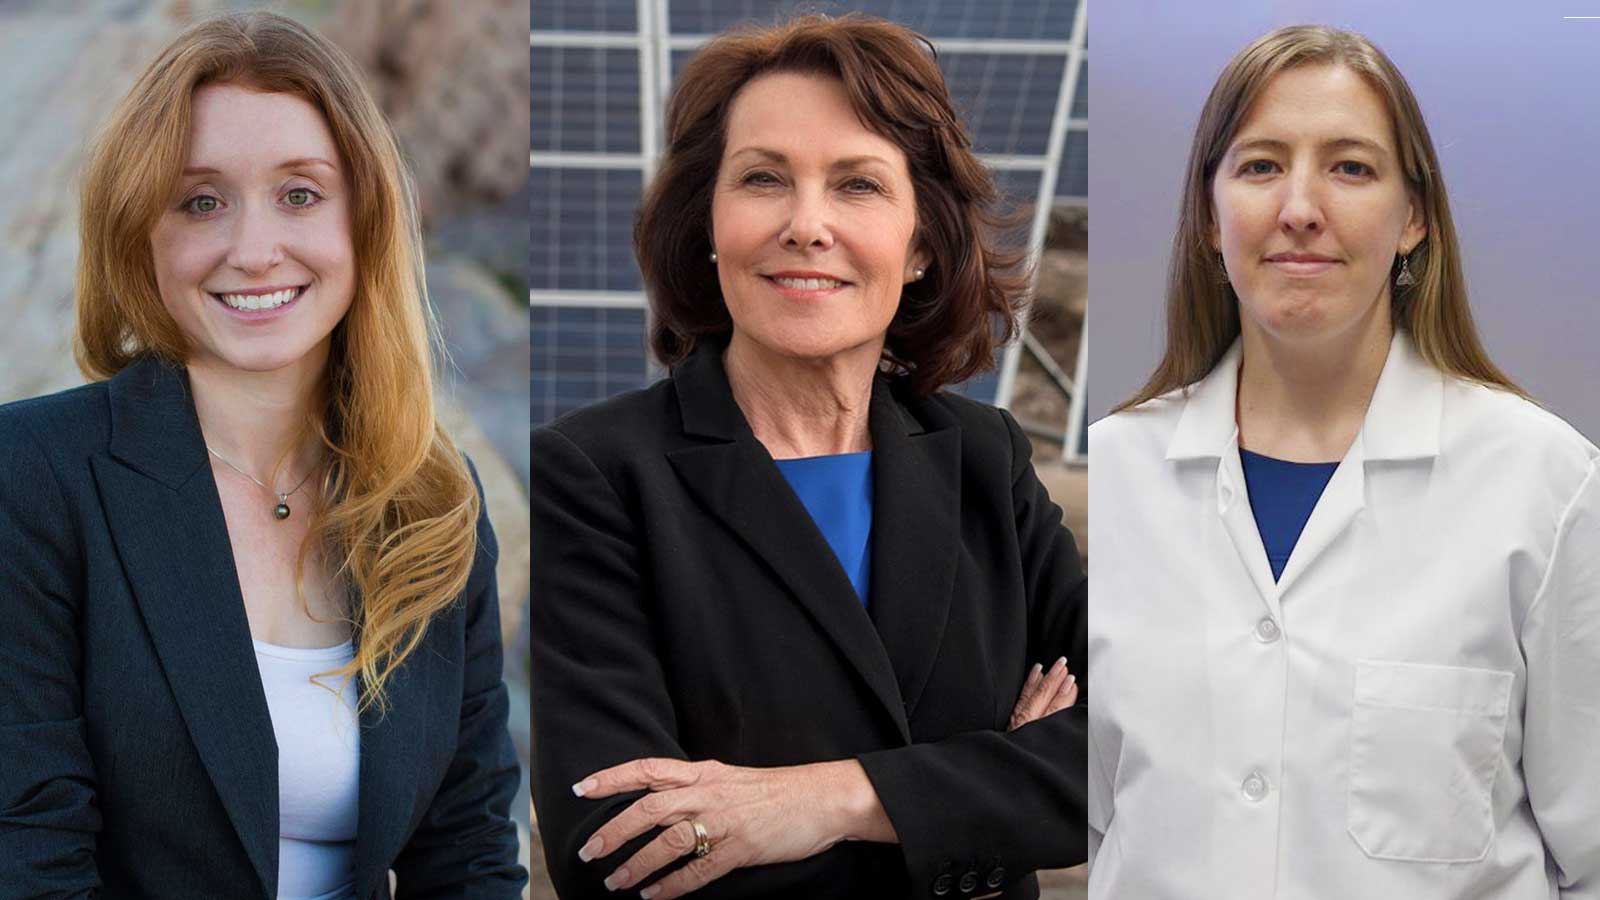 Jess Phoenix and other women scientists running for office in 2018